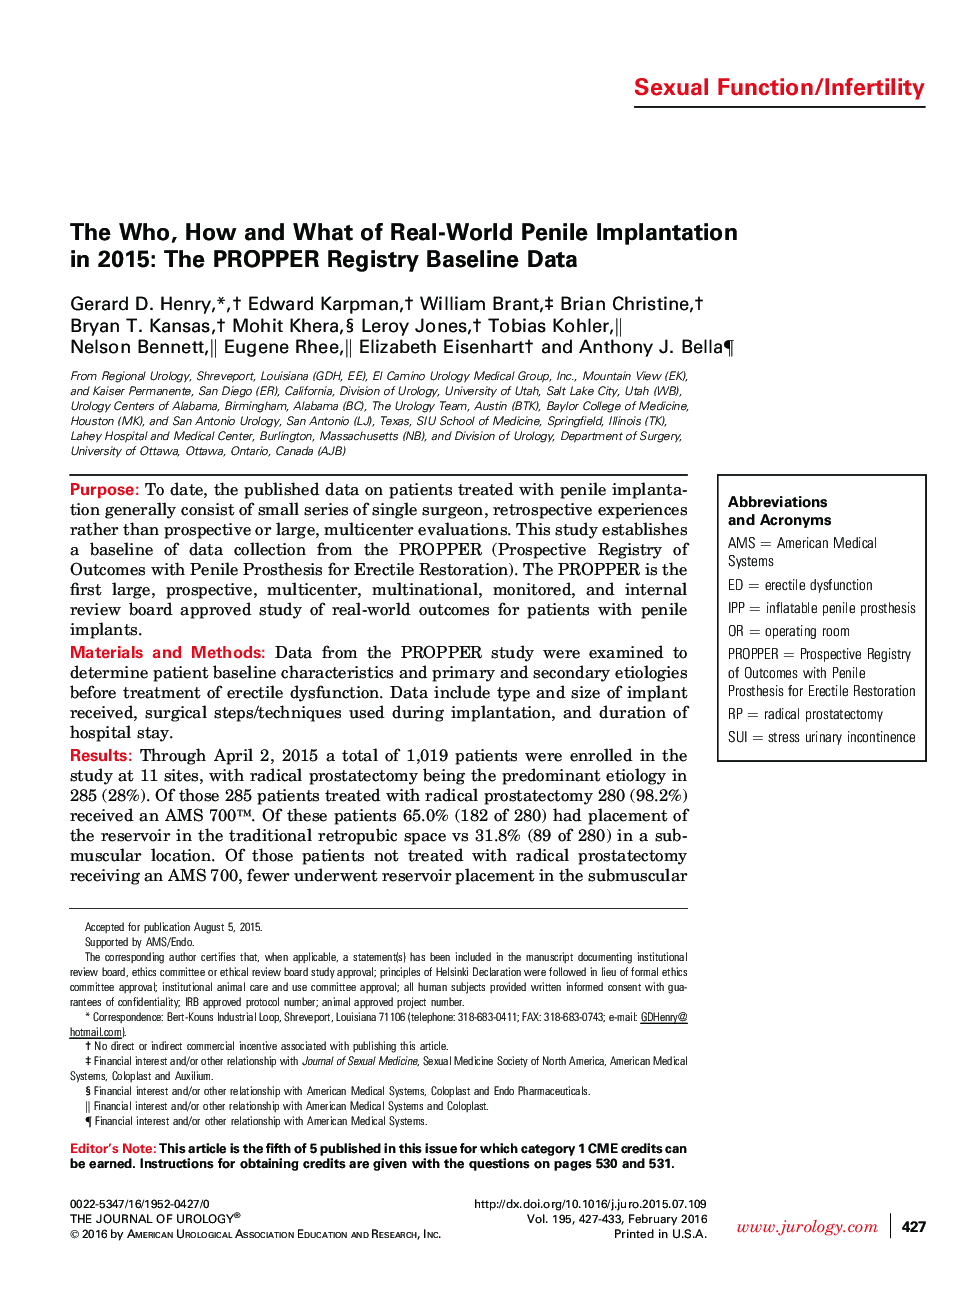 The Who, How and What of Real-World Penile Implantation in 2015: The PROPPER Registry Baseline Data 